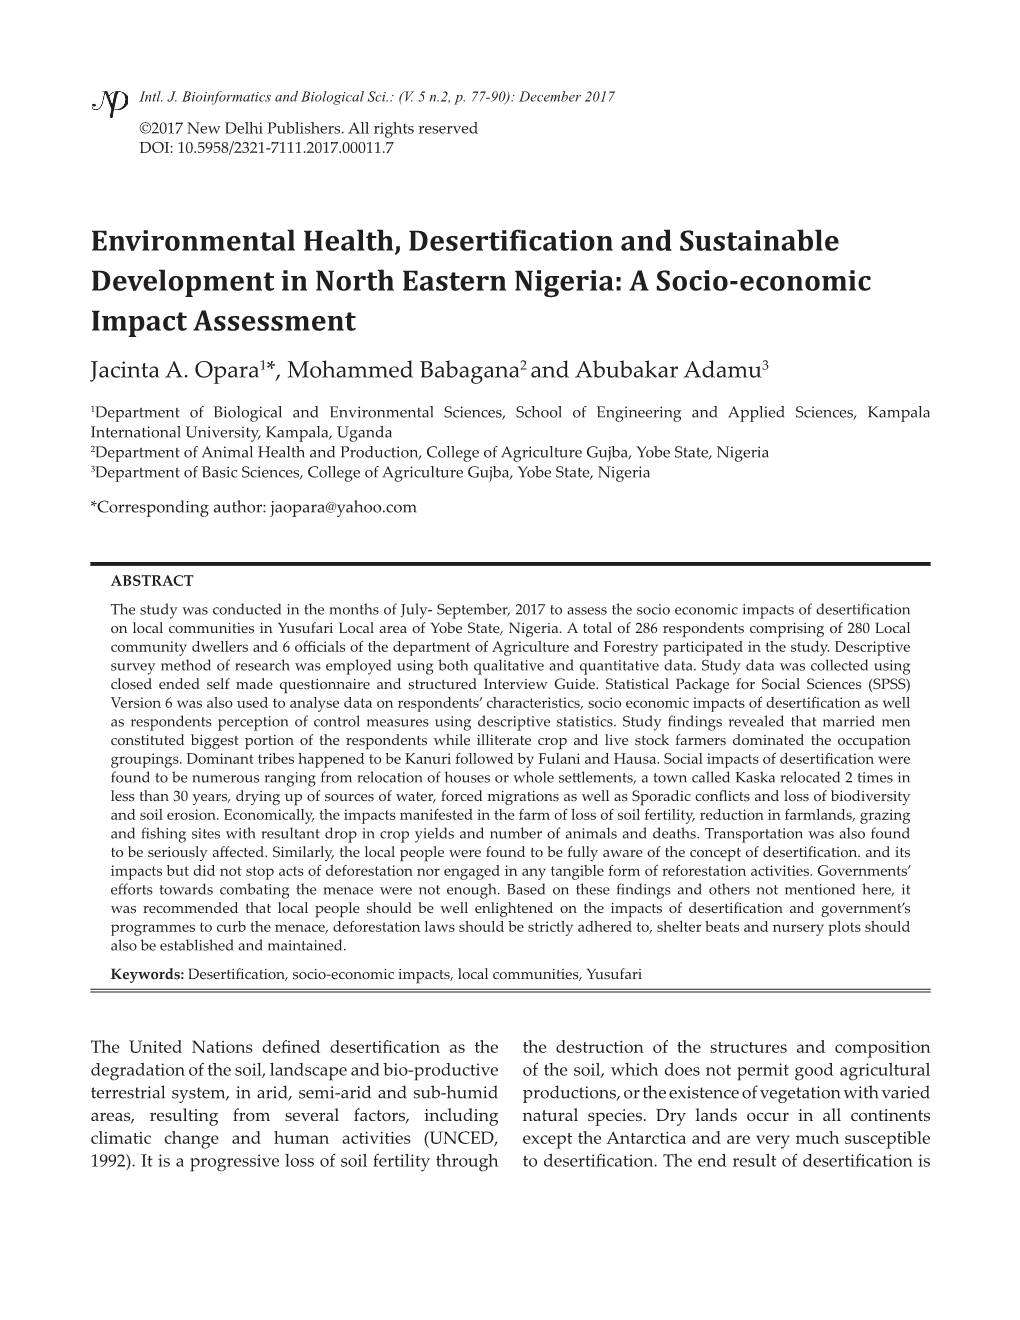 Environmental Health, Desertification and Sustainable Development in North Eastern Nigeria: a Socio-Economic Impact Assessment Jacinta A